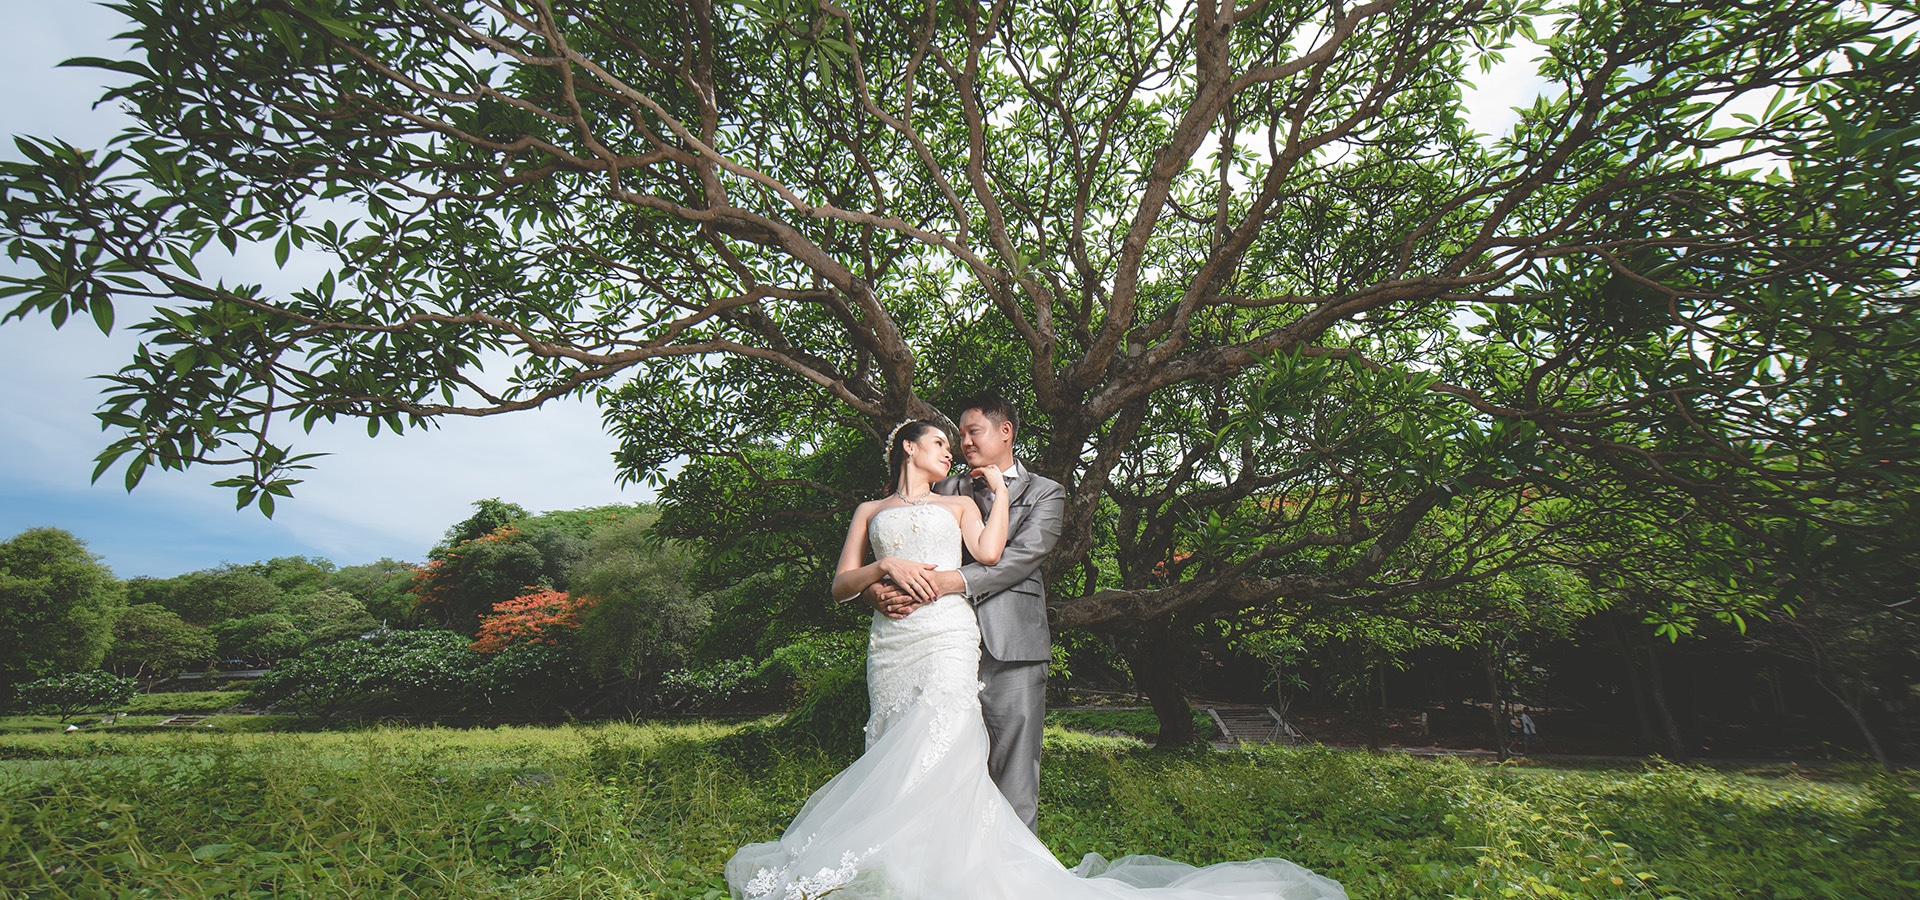 Heather & Kyle's Rustic Country Wedding — Brittany Juravich Photography